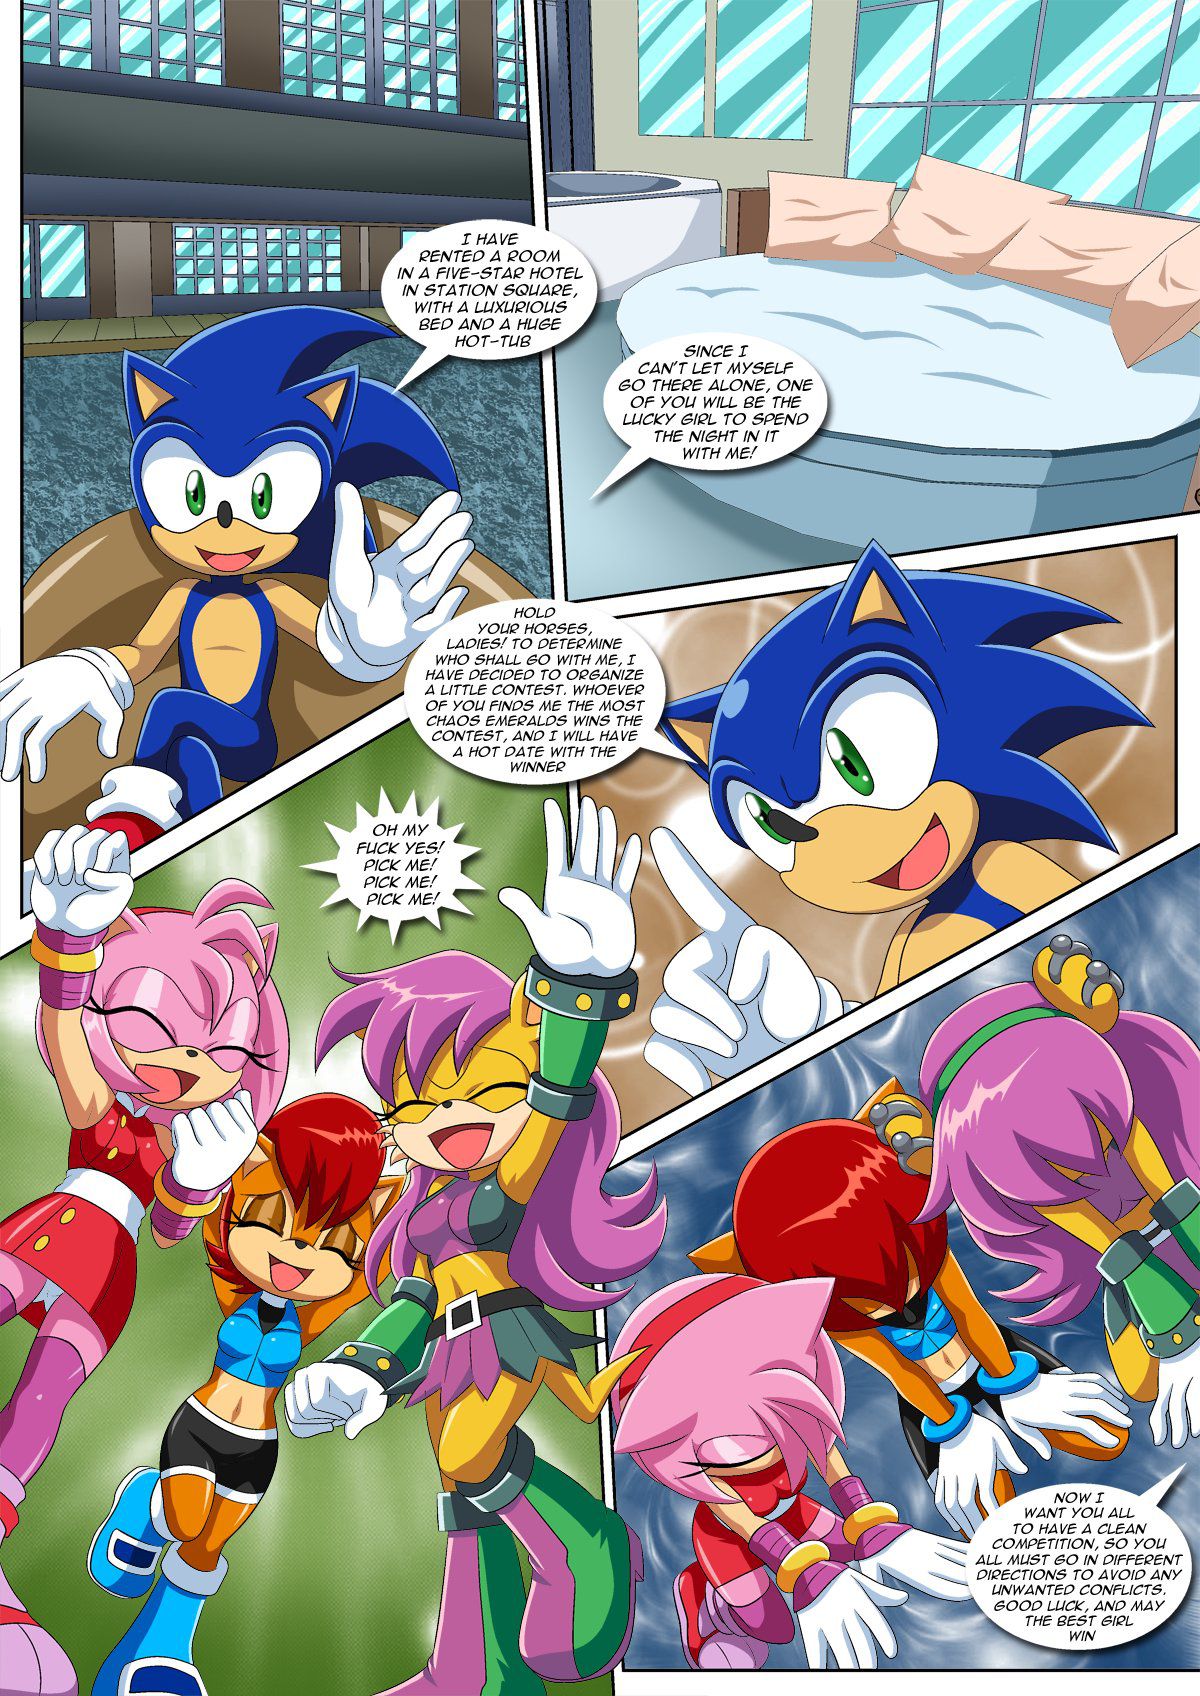 [Palcomix] Sonic Project XXX 4 (Sonic The Hedgehog) [Ongoing] 3